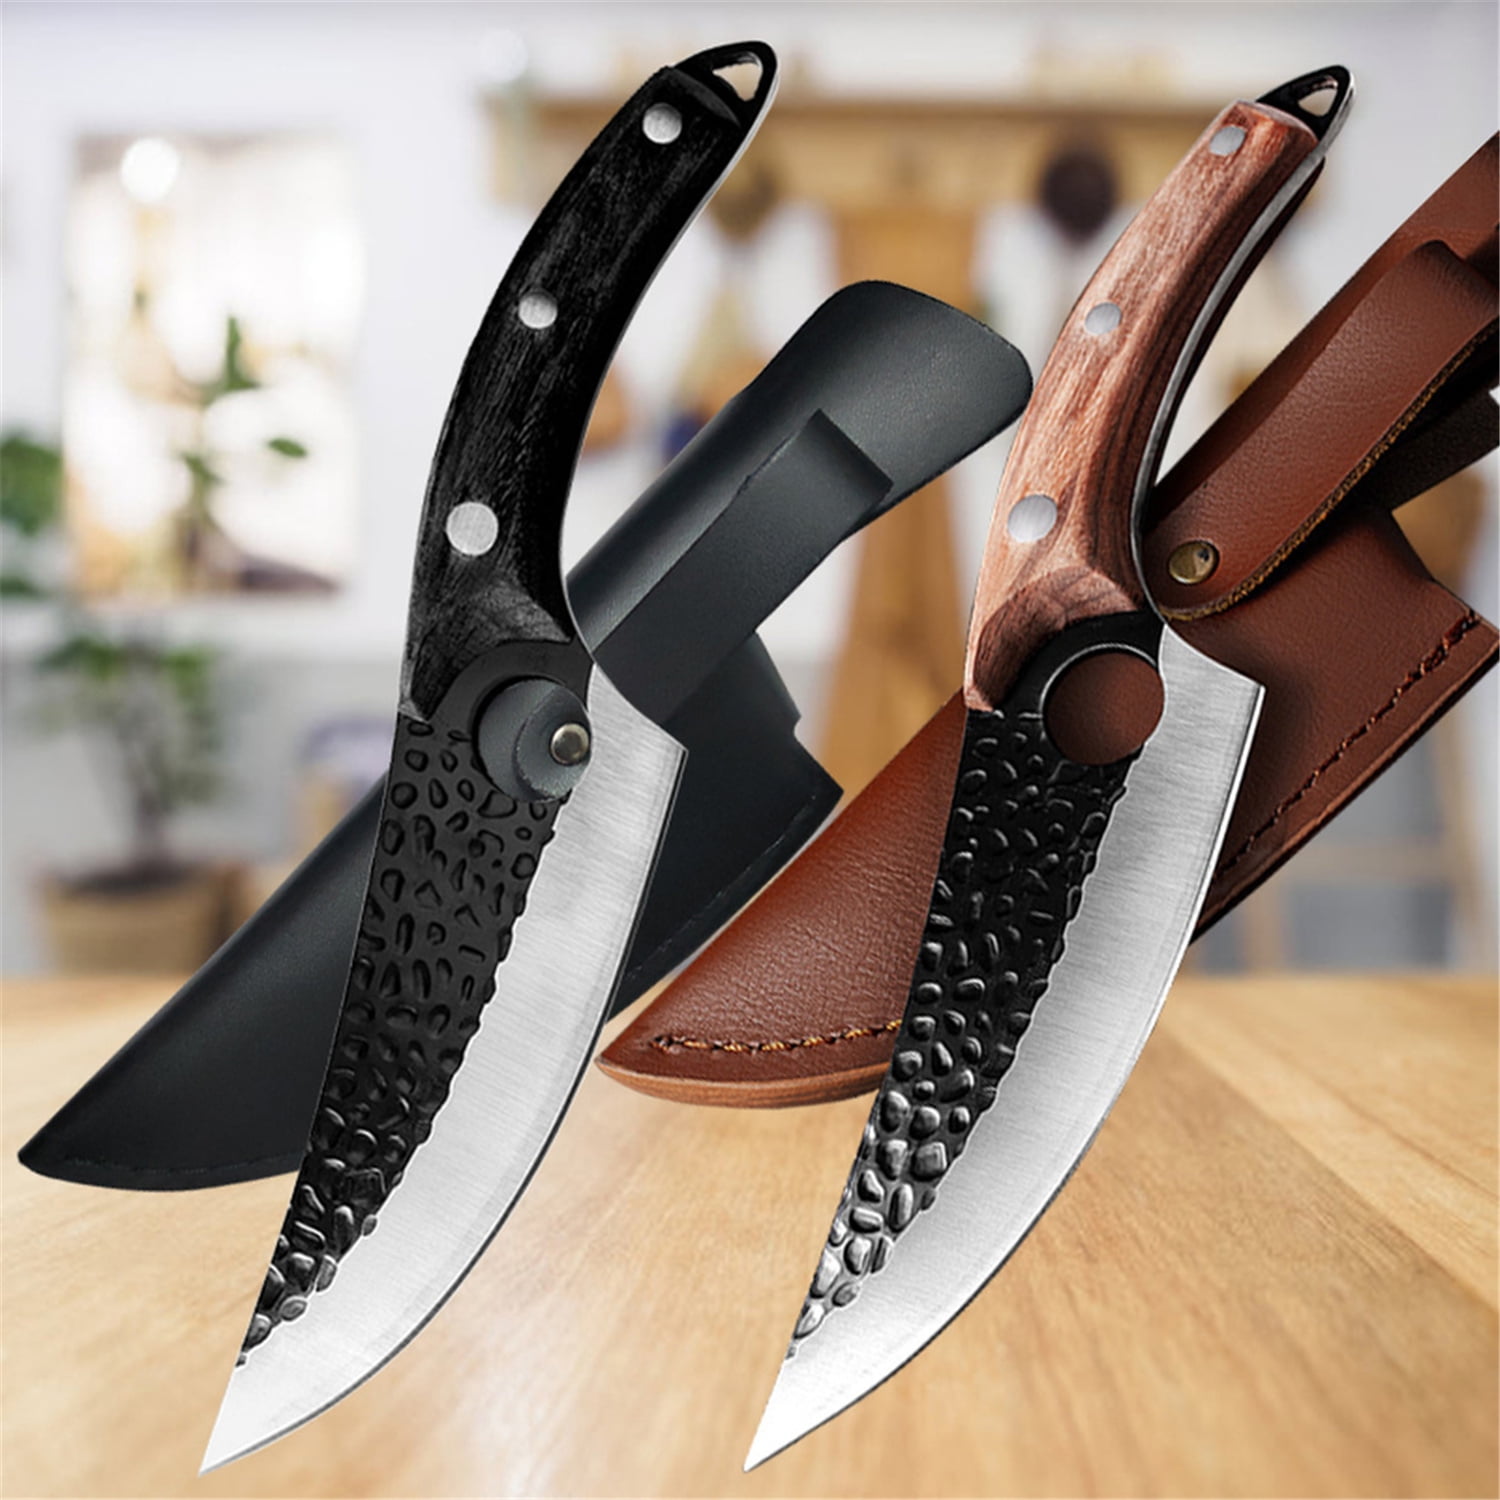 TIJERAS Butcher Knife Set, 3PCS Hand Forged Meat Cleaver & Serbian Chef  Knife & Viking Knives with Sheaths, Black High Carbon Steel Meat Cutting